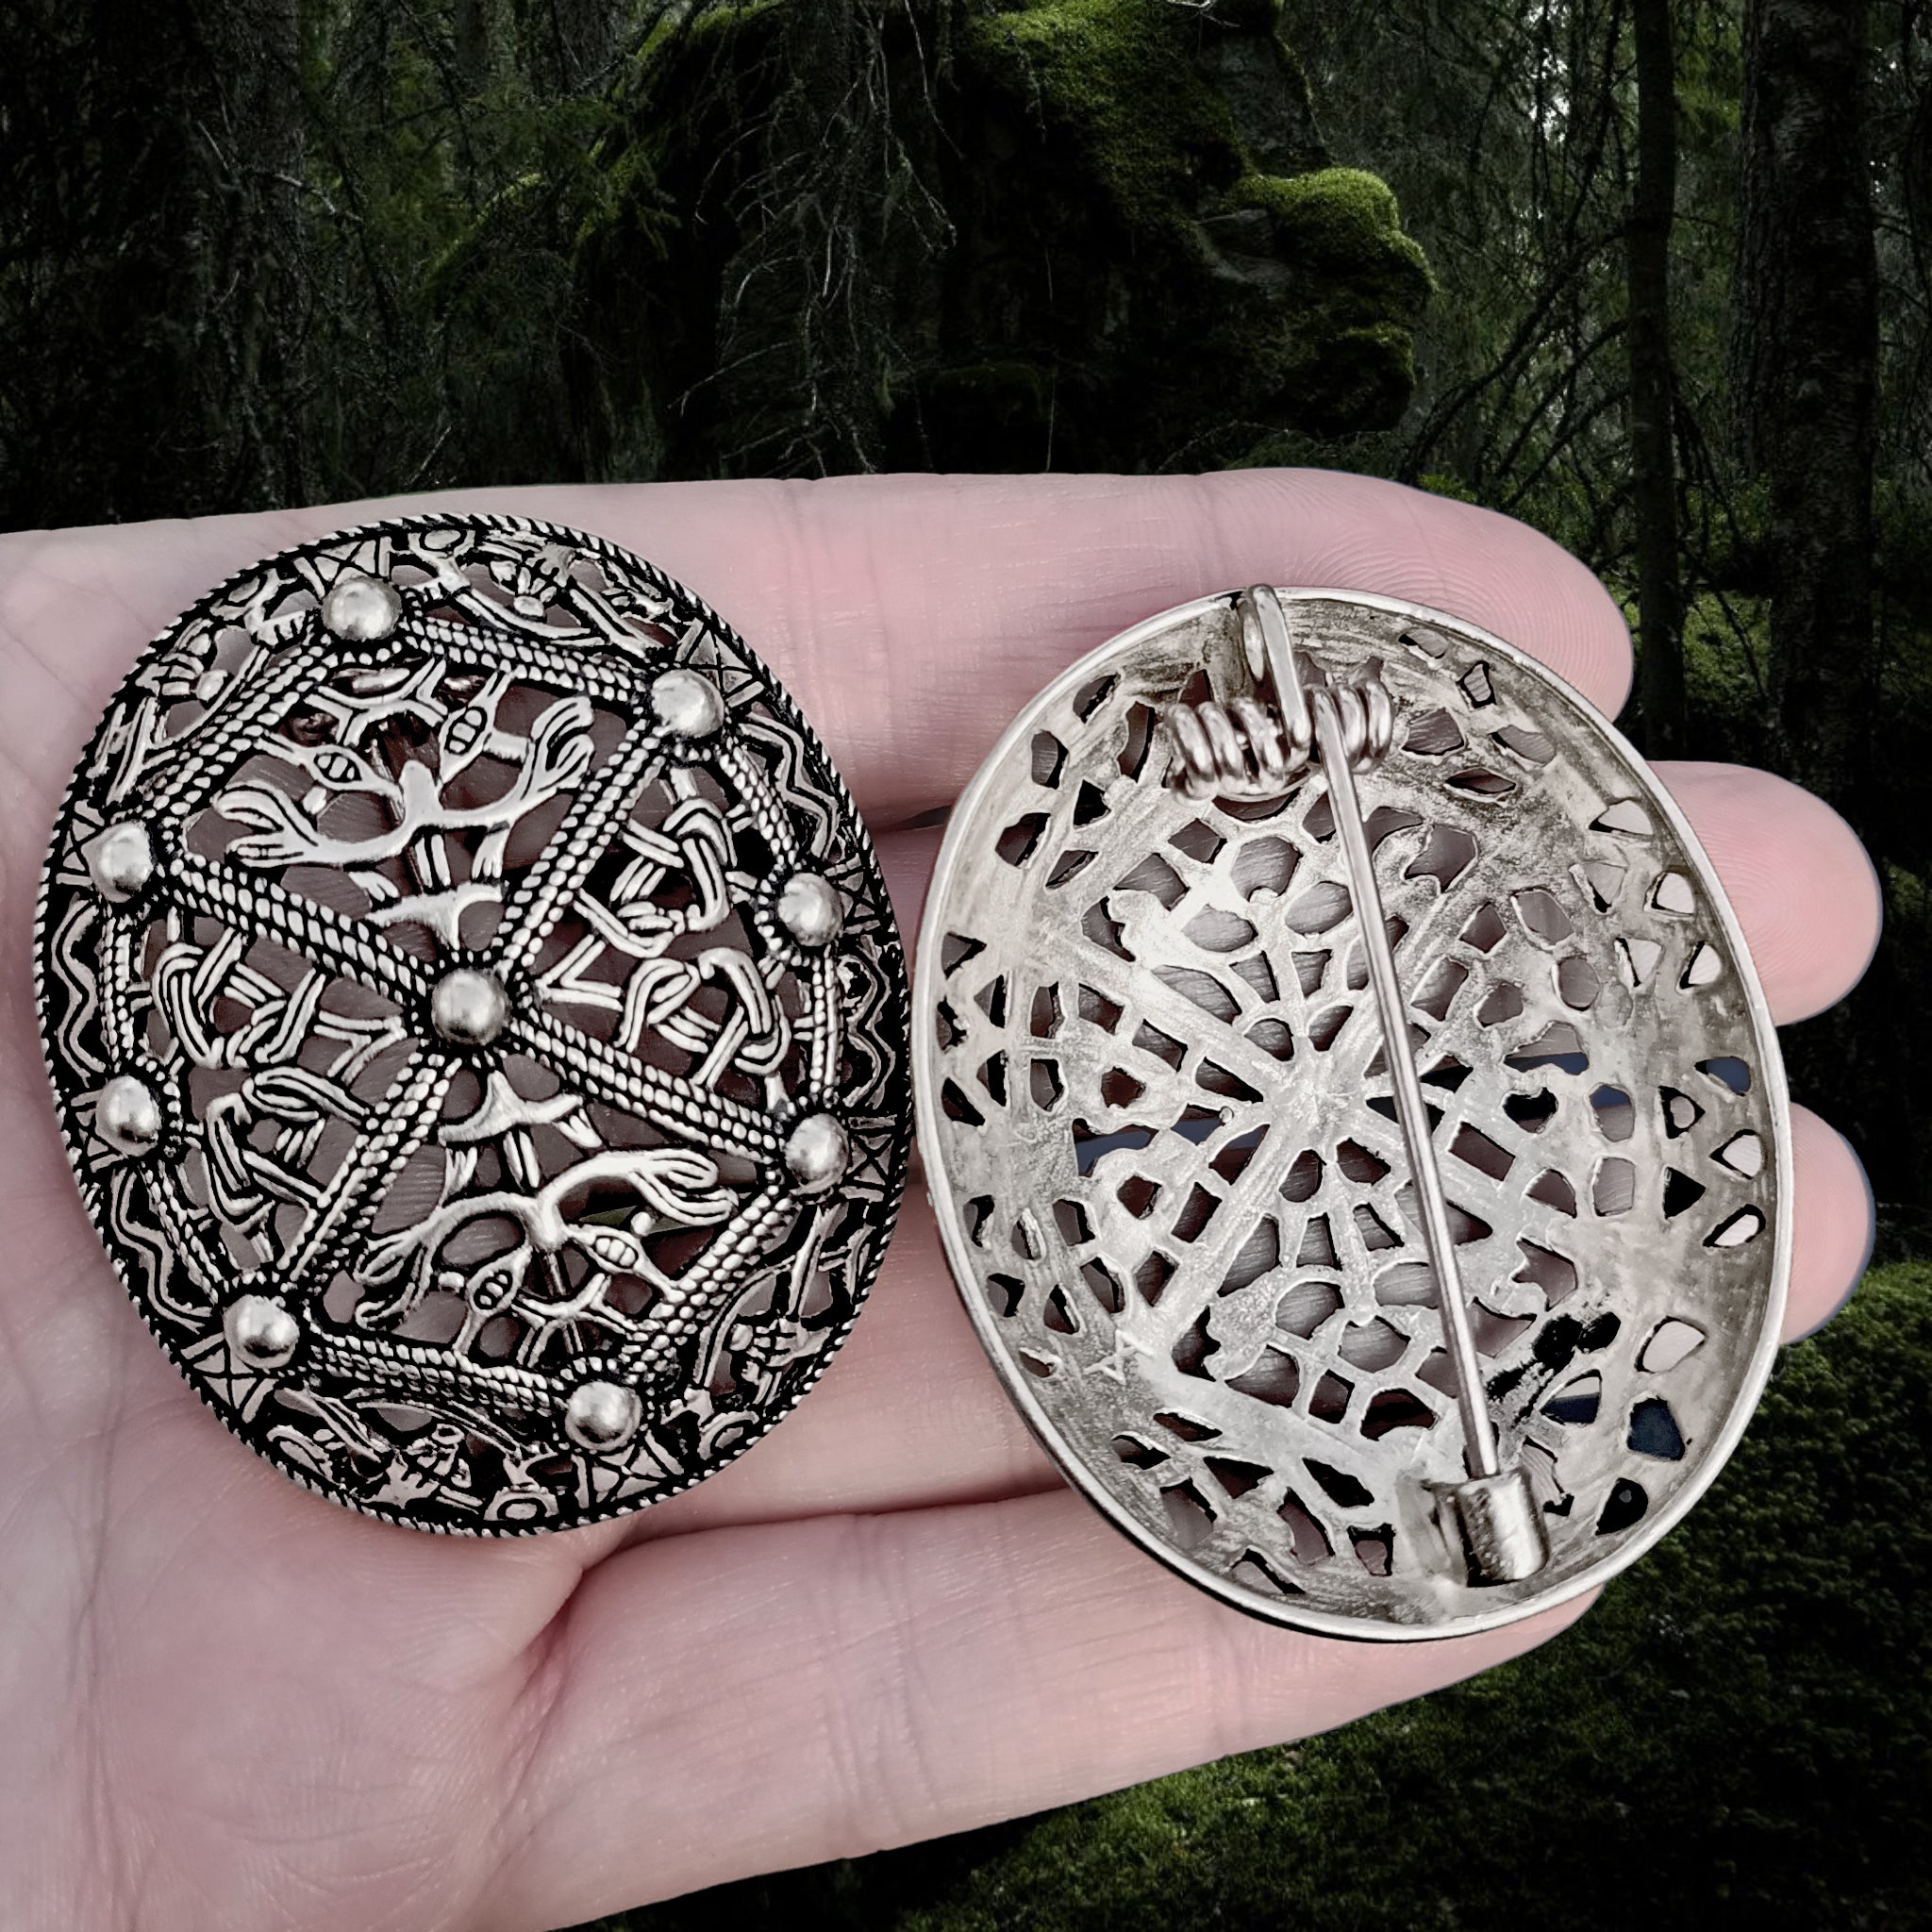 Silver Plated Borre Style Openwork Akershus Viking Tortoise Brooches in Hand - Front and back